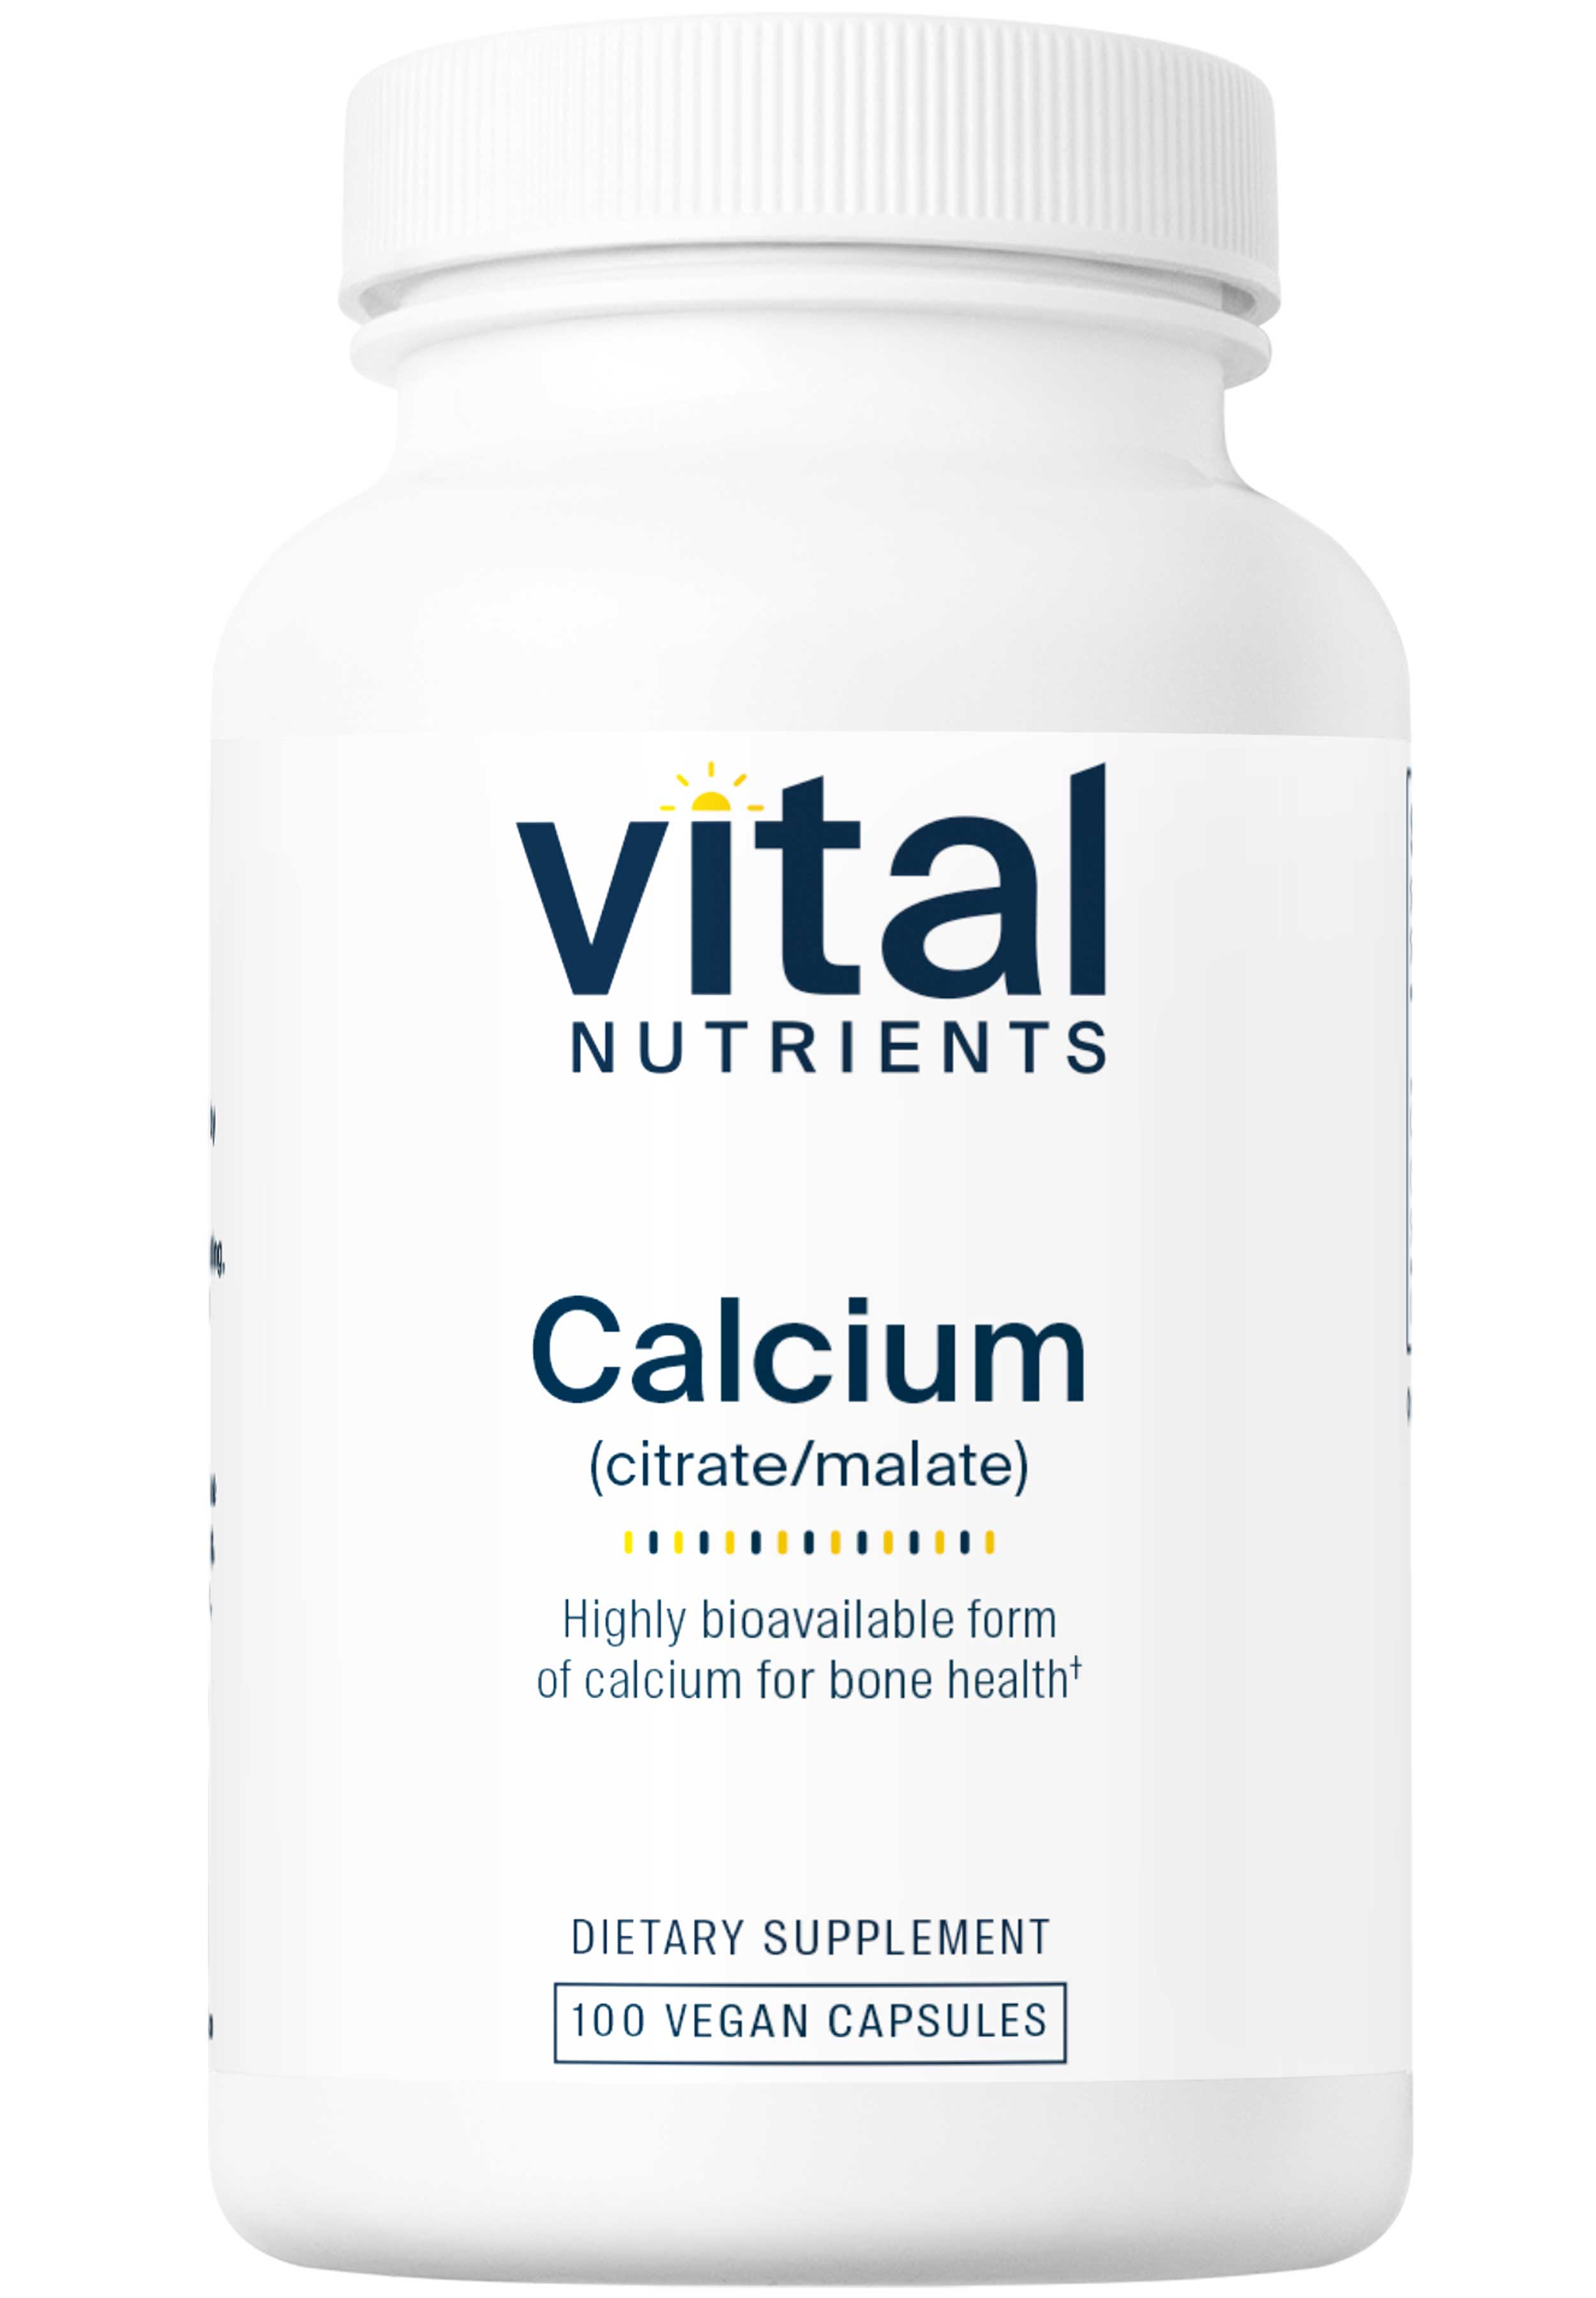 Vital Nutrients Calcium (citrate/malate) 150mg